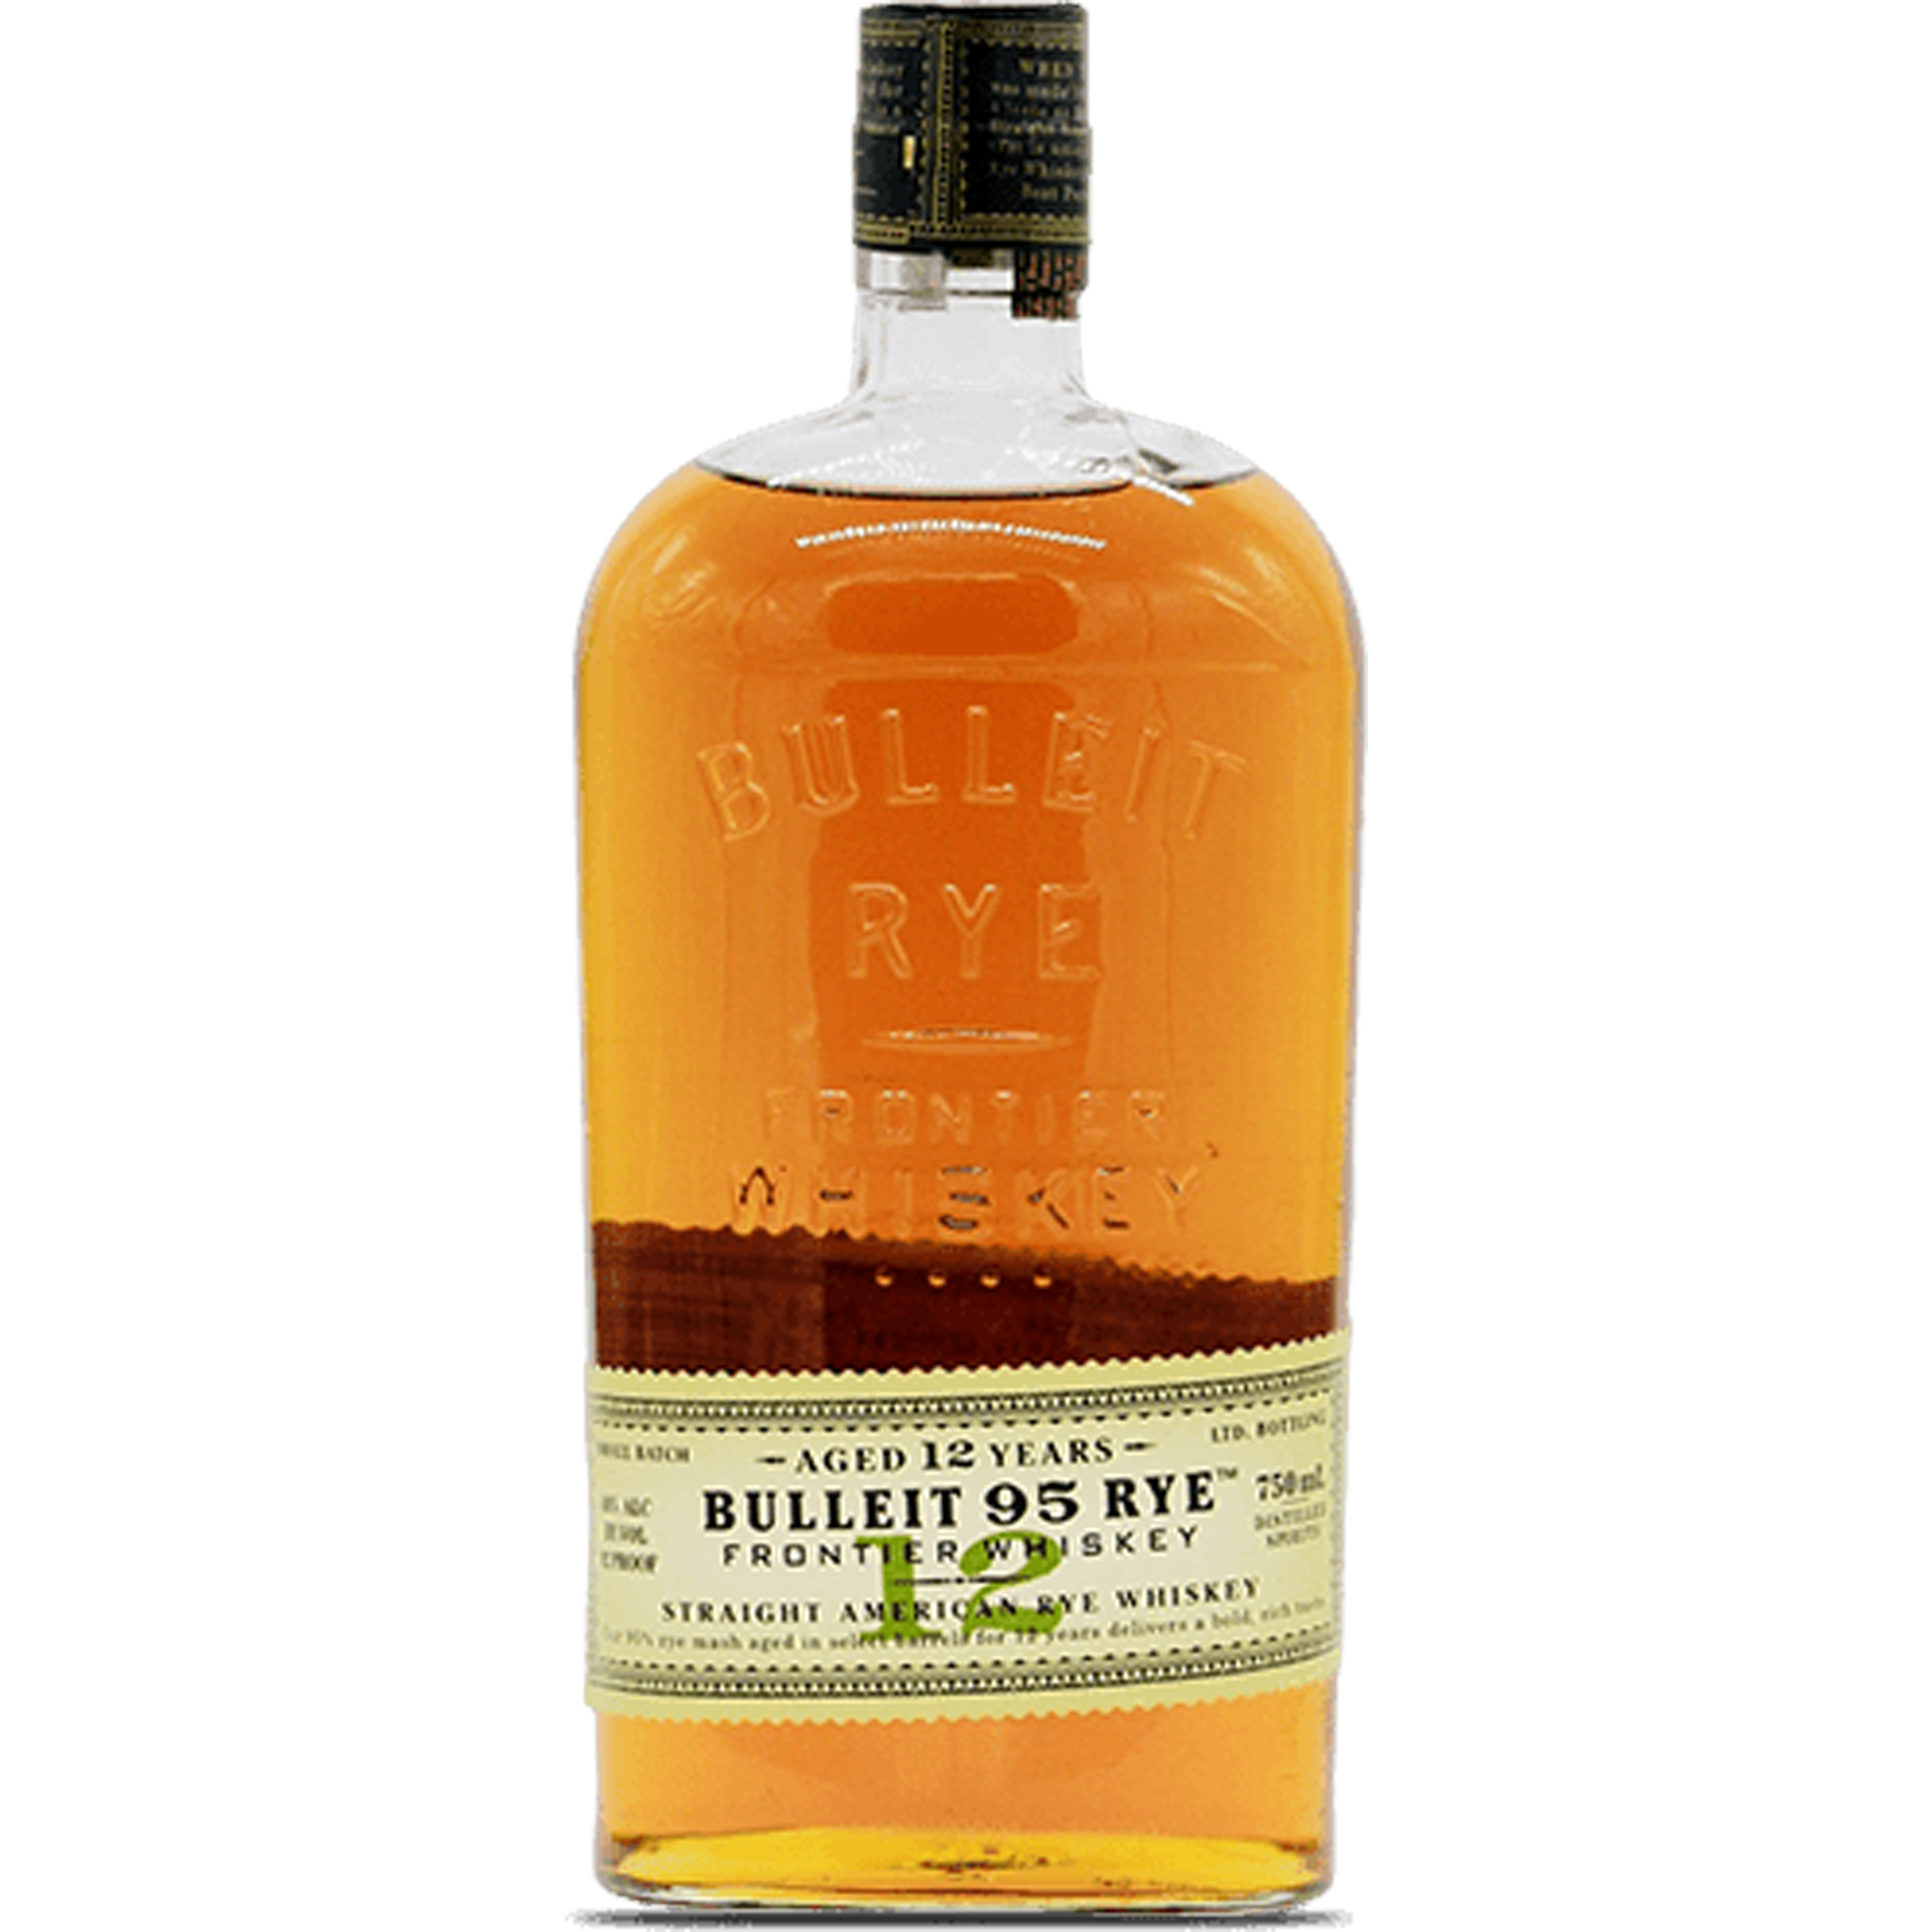 Bulleit Rye Aged 12 Years Frontier Whiskey